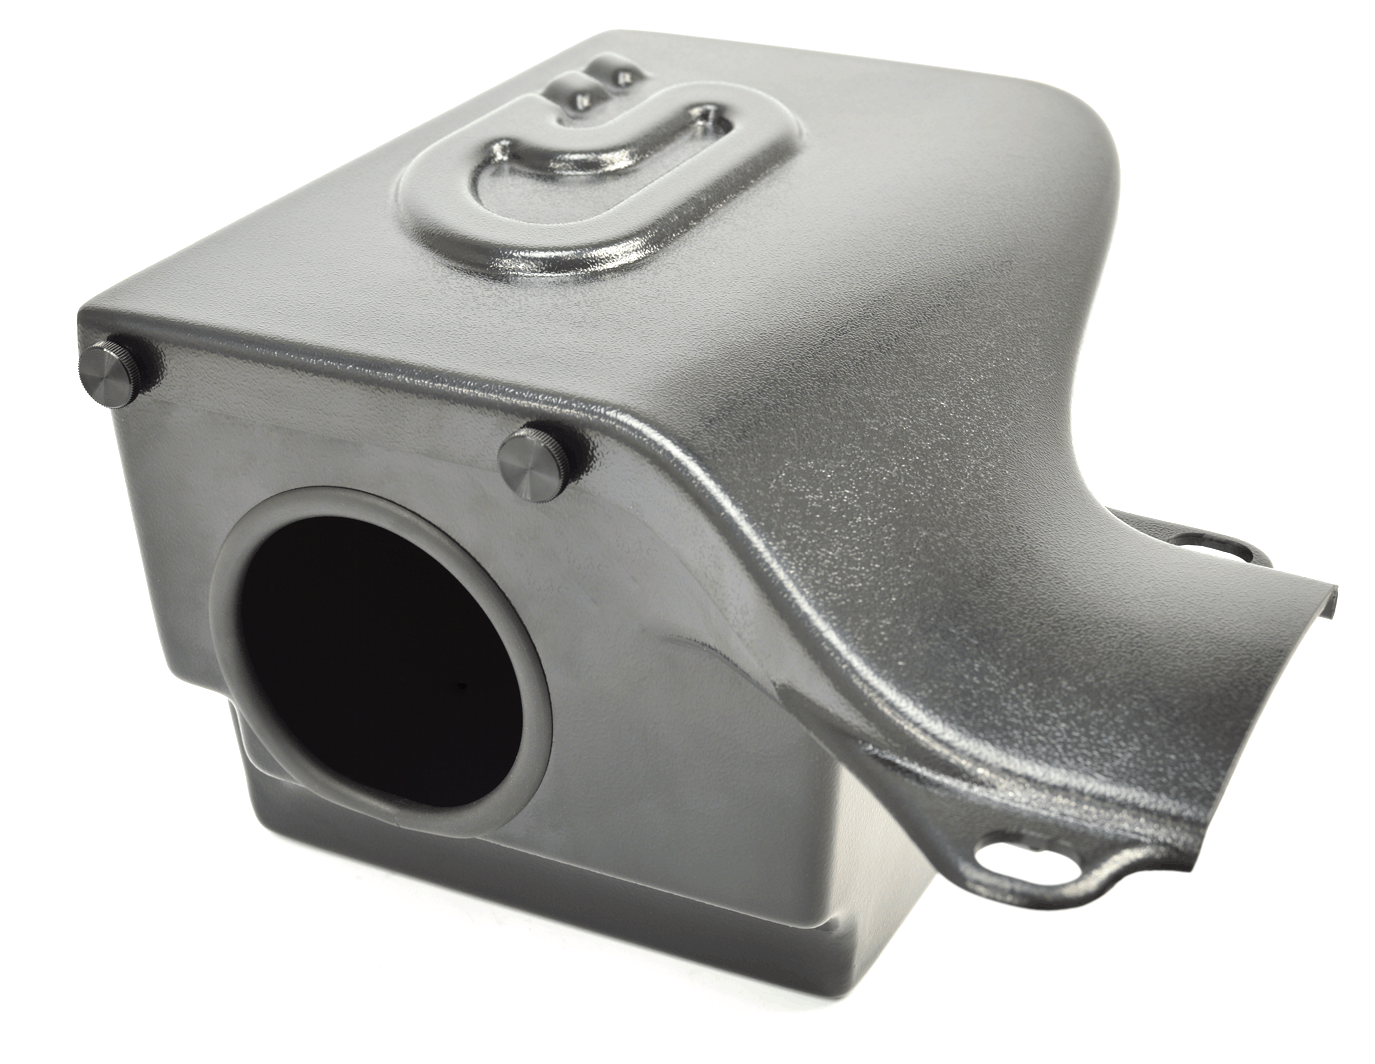 Designed to perfectly fit your Mazda 3 and your Mazda 6. Our cold air box is designed for easy install and easy filter maintenance.